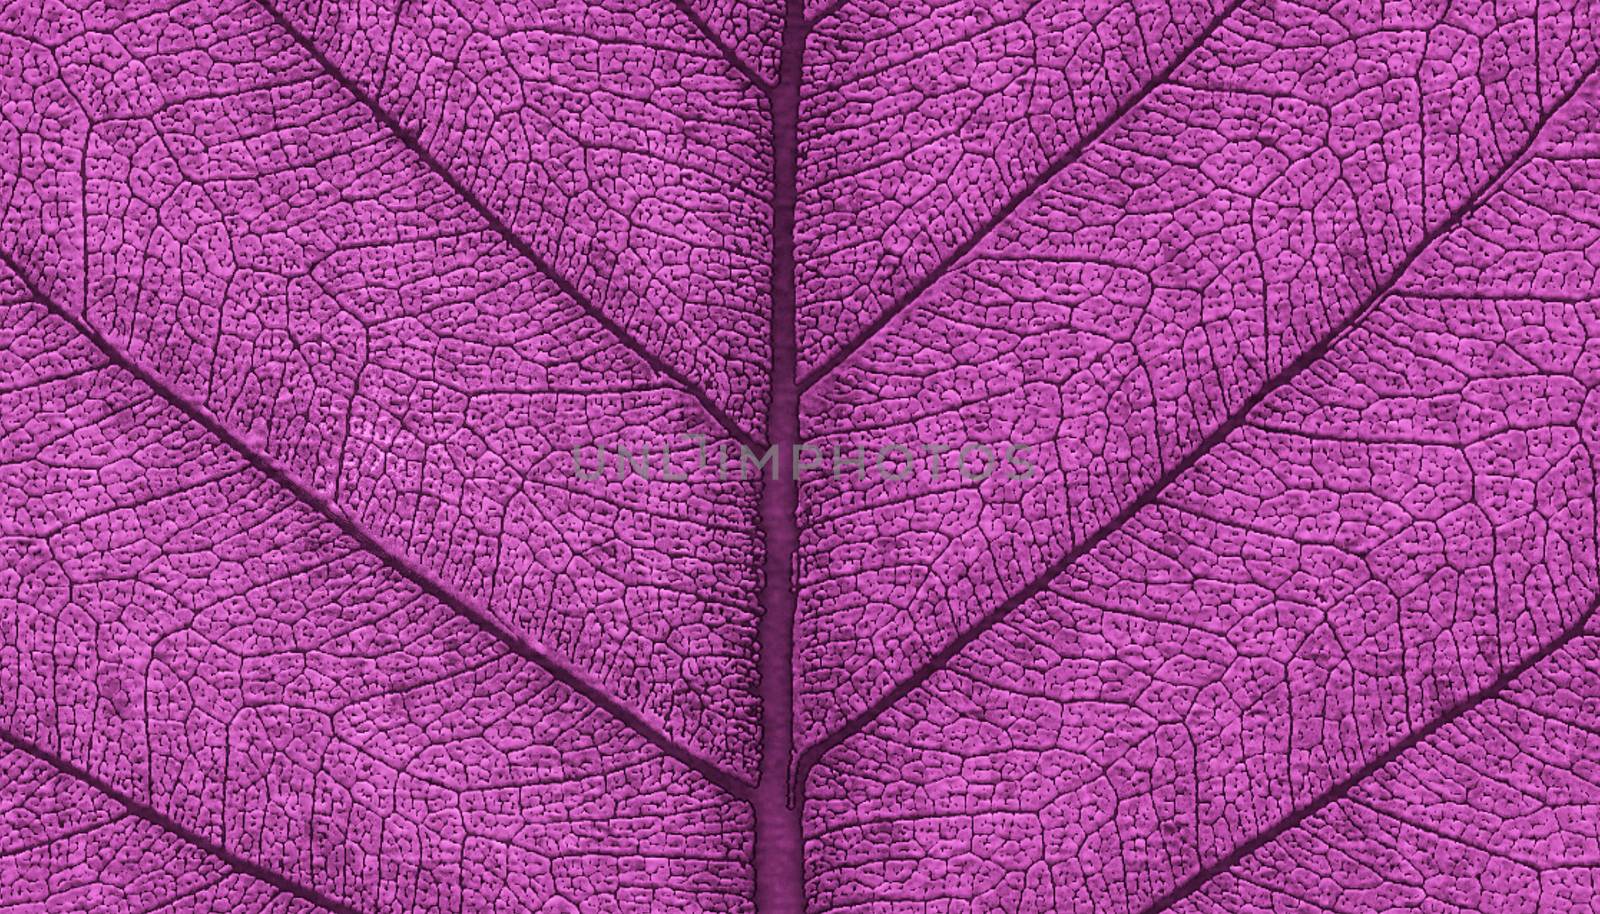 Leaf natural background zoomed texture 3d rendering by F1b0nacci